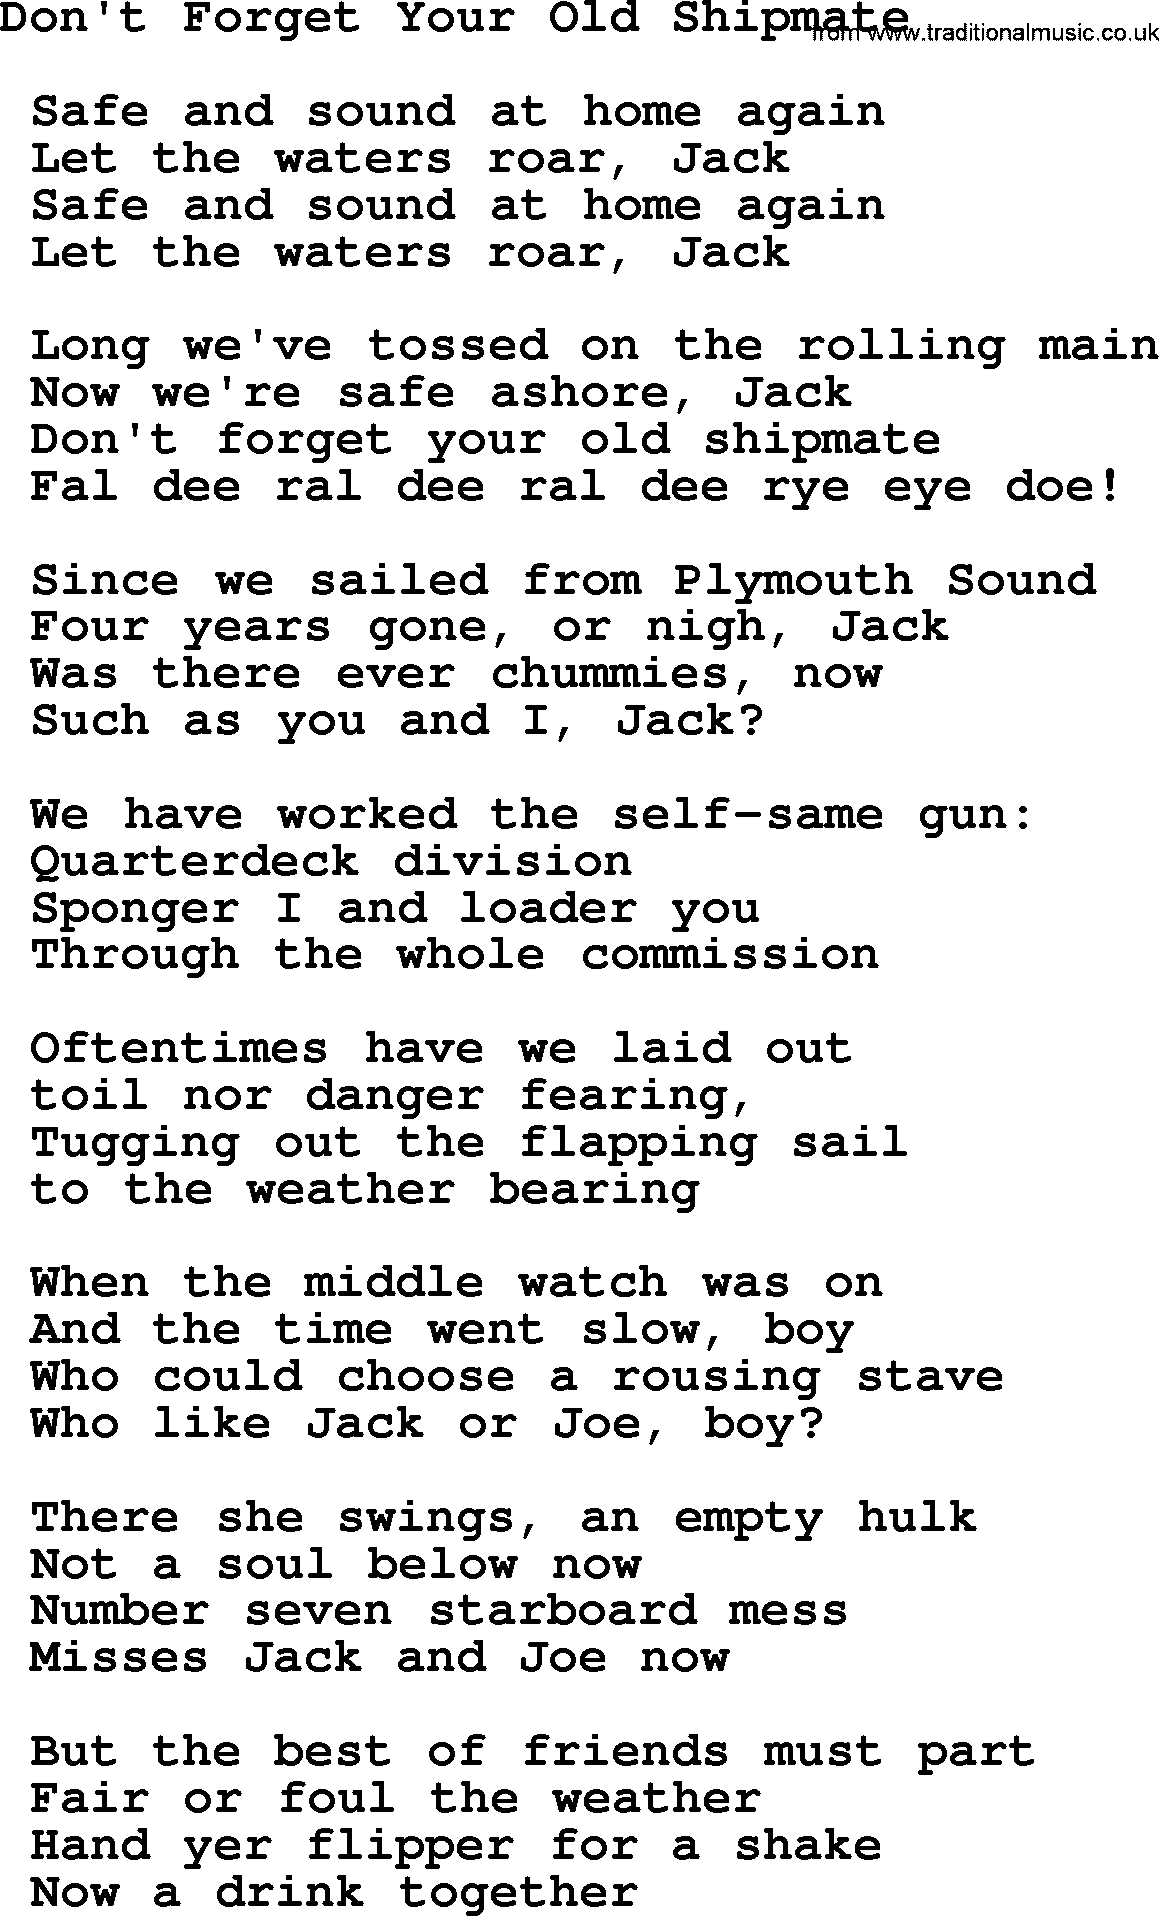 Sea Song or Shantie: Dont Forget Your Old Shipmate, lyrics